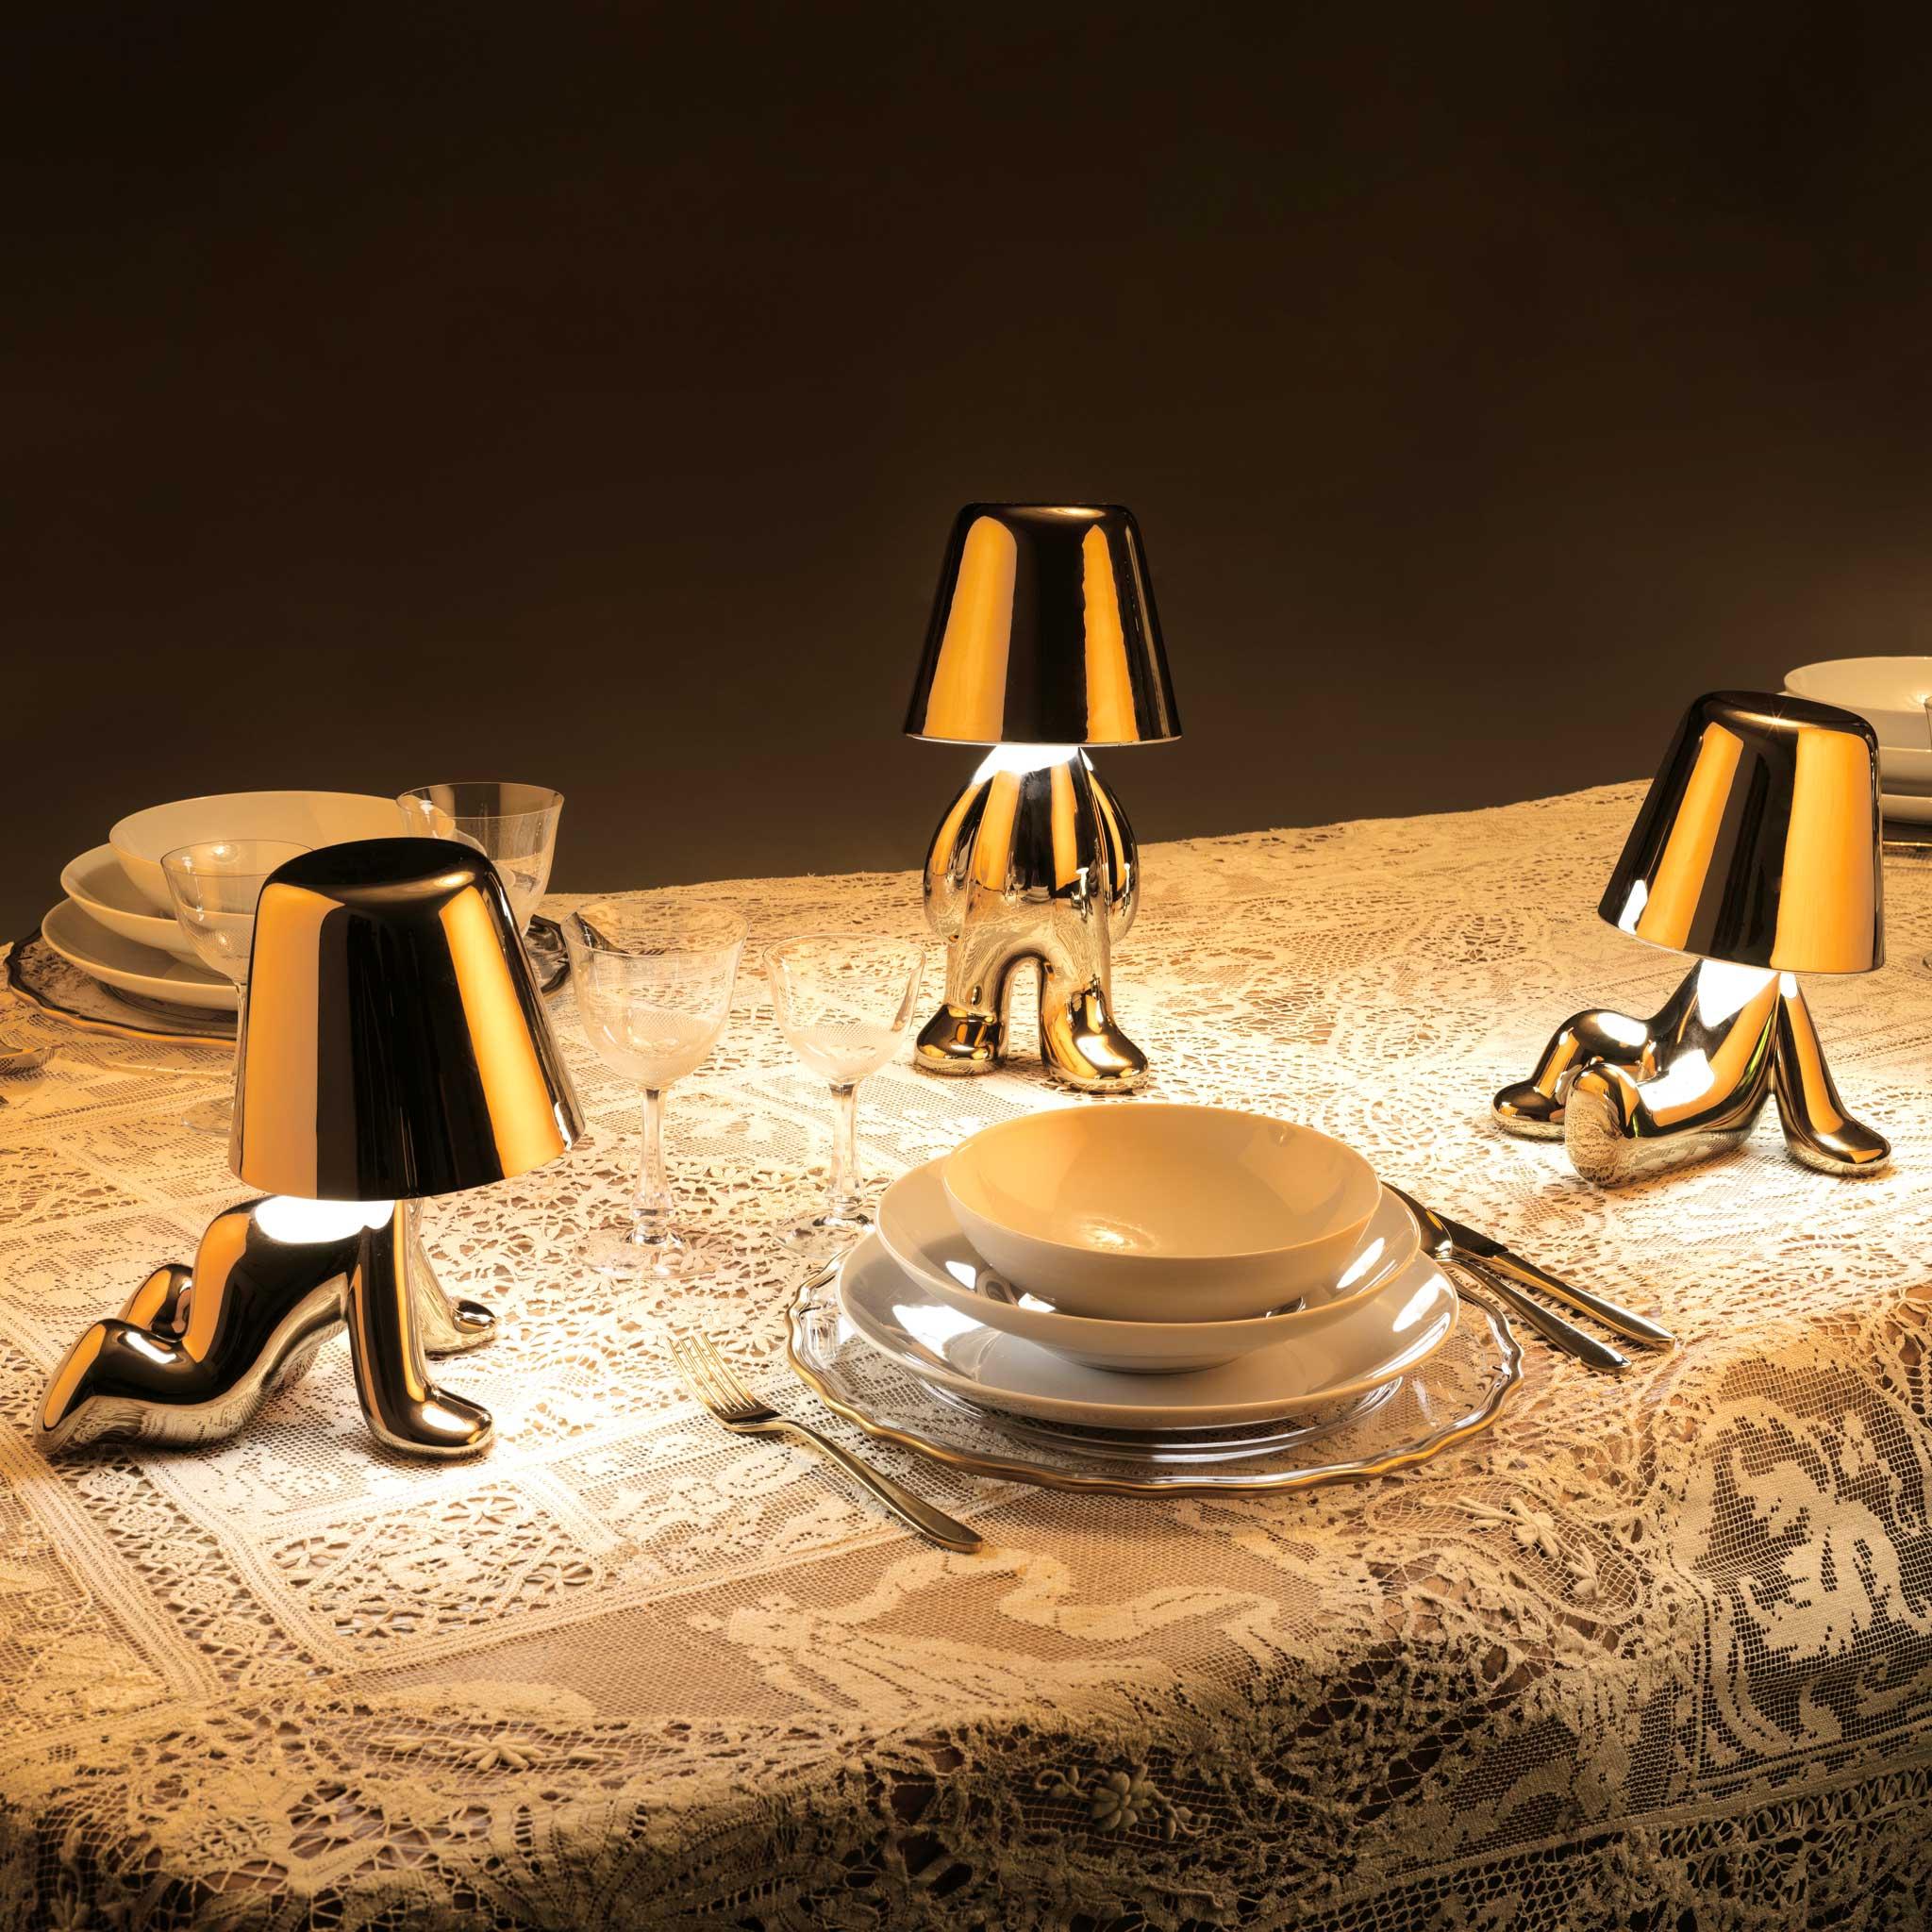 Italian Golden Brothers Bob LED Lamp, Designed by Stefano Giovannoni, Made in Italy